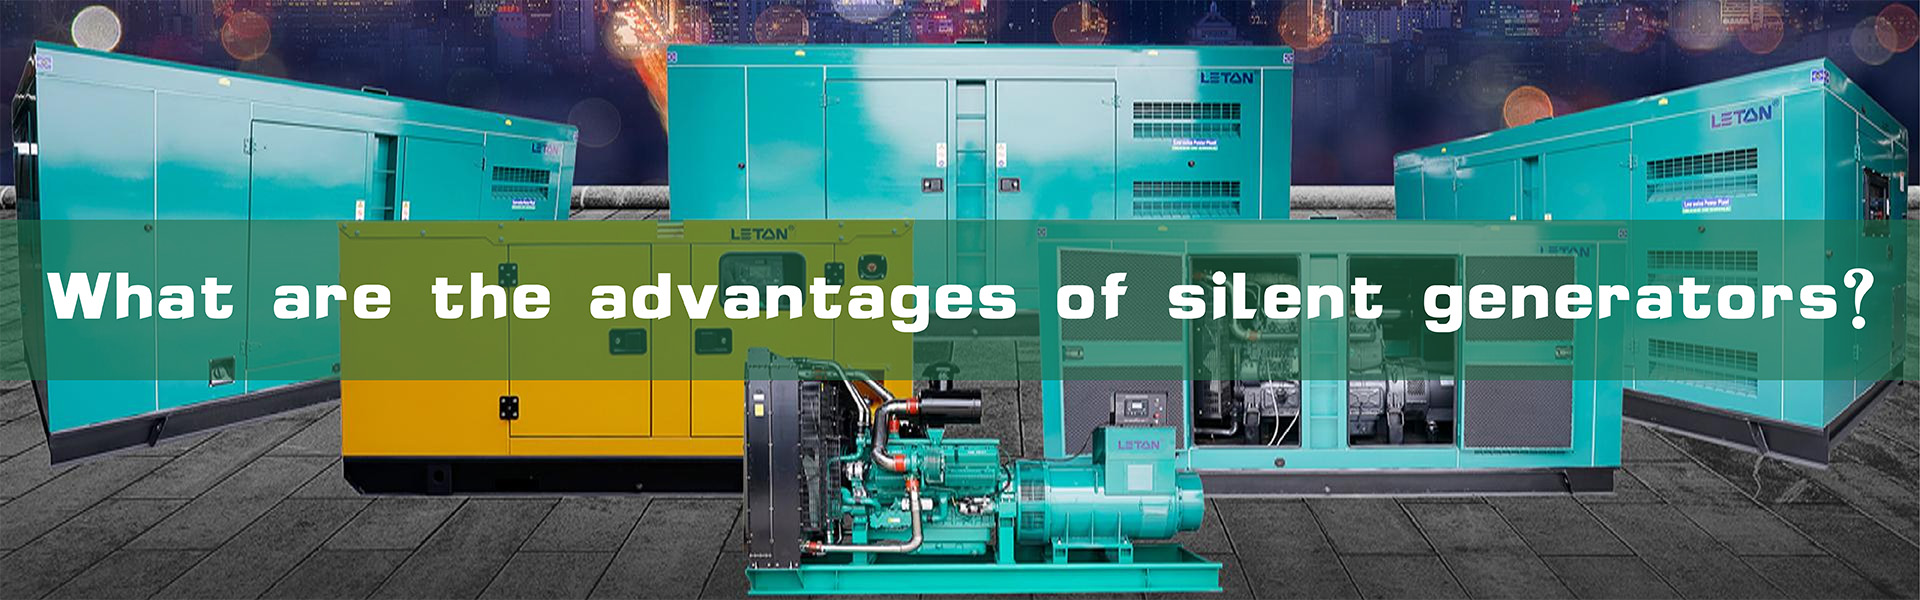 What are the advantages of silent generators?